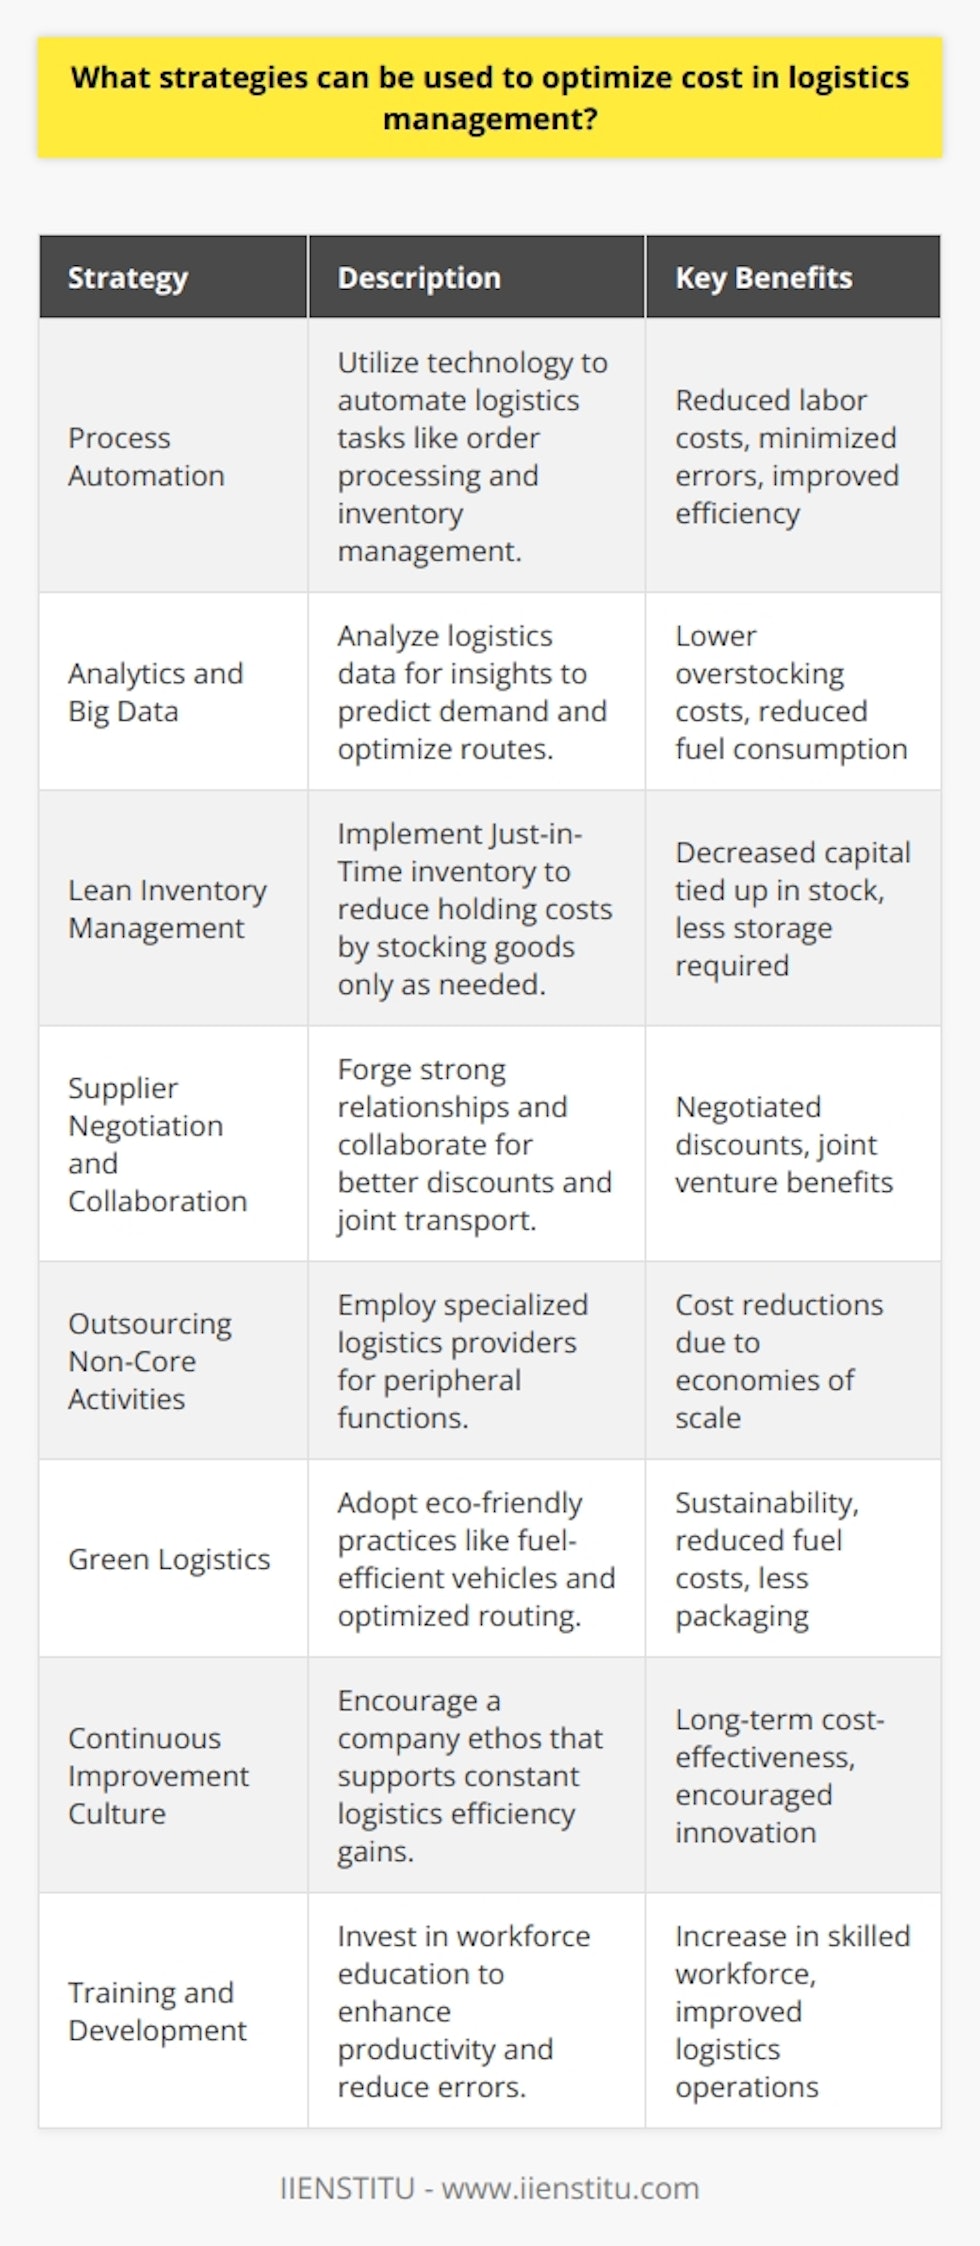 Cost optimization in logistics management is a multifaceted challenge that demands careful planning, strategic decision-making, and the implementation of sophisticated techniques. Given the intricate nature of supply chain operations, organizations that prioritize cost-efficiency without sacrificing service quality can establish a formidable competitive advantage. Here are some key strategies that can be effectively employed to optimize logistics costs:1. **Process Automation:**   Embracing advanced technology to automate key logistics functions is critical for reducing labor costs and minimizing errors. Software solutions can manage tasks such as order processing, shipment tracking, and inventory management with greater accuracy and efficiency. For instance, the use of Transportation Management Systems (TMS) can streamline route planning and optimize freight consolidation.2. **Analytics and Big Data:**   Using analytics tools to interpret logistic data can unveil patterns and insights that drive smarter decision-making. Leveraging big data allows businesses to predict demand more accurately, adjust inventory levels accordingly, and optimize delivery routes, thereby saving costs related to overstocking and inefficient fuel consumption.3. **Lean Inventory Management:**   Adopting lean inventory techniques like Just-in-Time (JIT) inventory can dramatically reduce holding costs by delivering goods only as they are needed. This strategy avoids excess stock tying up capital and requiring additional storage space.4. **Supplier Negotiation and Collaboration:**   Building strong relationships with suppliers can lead to negotiated discounts and better terms. Additionally, collaboration might open opportunities for cost sharing, joint transportation arrangements, or consolidated procurement that can benefit all parties involved.5. **Outsourcing Non-Core Activities:**   For functions that are peripheral to the core business, outsourcing to specialized logistics providers can lead to substantial cost savings. These providers often have economies of scale and efficiencies that individual companies cannot match on their own.6. **Green Logistics:**   Implementing eco-friendly logistics practices can not only enhance a company’s sustainability credentials but also result in cost savings. Fuel-efficient vehicles, optimized routing, and reduced packaging materials are all examples of green initiatives that have a direct impact on the bottom line.7. **Continuous Improvement Culture:**   Instilling a company-wide ethos of continuous improvement can lead to incremental gains in logistics efficiency. Encouraging feedback, rewarding innovation, and regularly reviewing performance metrics helps to ensure processes remain cost-effective and fit for purpose.8. **Training and Development:**   Investing in employee training can increase productivity and reduce costly mistakes. Skilled workers who understand the latest logistics technologies and best practices can more effectively contribute to cost-saving initiatives.Additionally, by leveraging resources from educational institutions like IIENSTITU, which might offer specialized courses in logistics management and supply chain optimization, businesses can stay abreast of the latest strategies and tools available to reduce costs and streamline their supply chain operations.In conclusion, logistics cost optimization is a complex endeavor that requires a deliberate approach combining technology, data analysis, process improvements, and strategic partnerships. By employing these tactics, businesses can not only cut costs but also enhance service levels, leading to greater customer satisfaction and long-term sustainability.